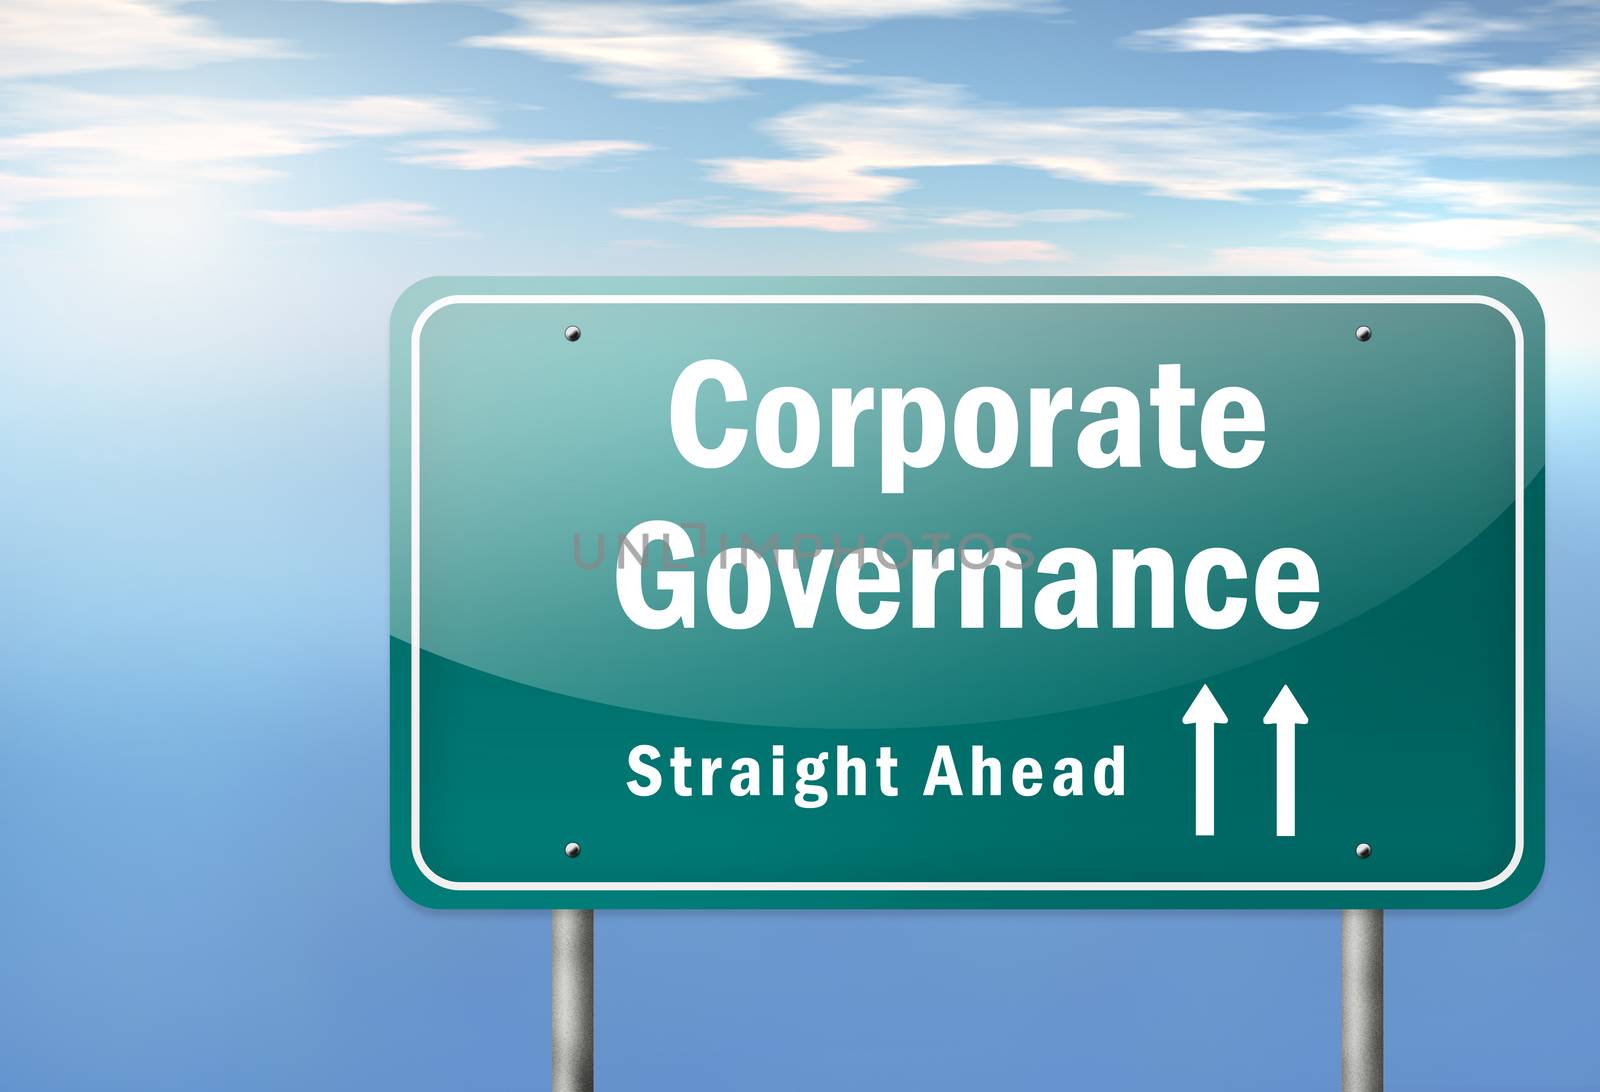 Highway Signpost with Corporate Governance wording